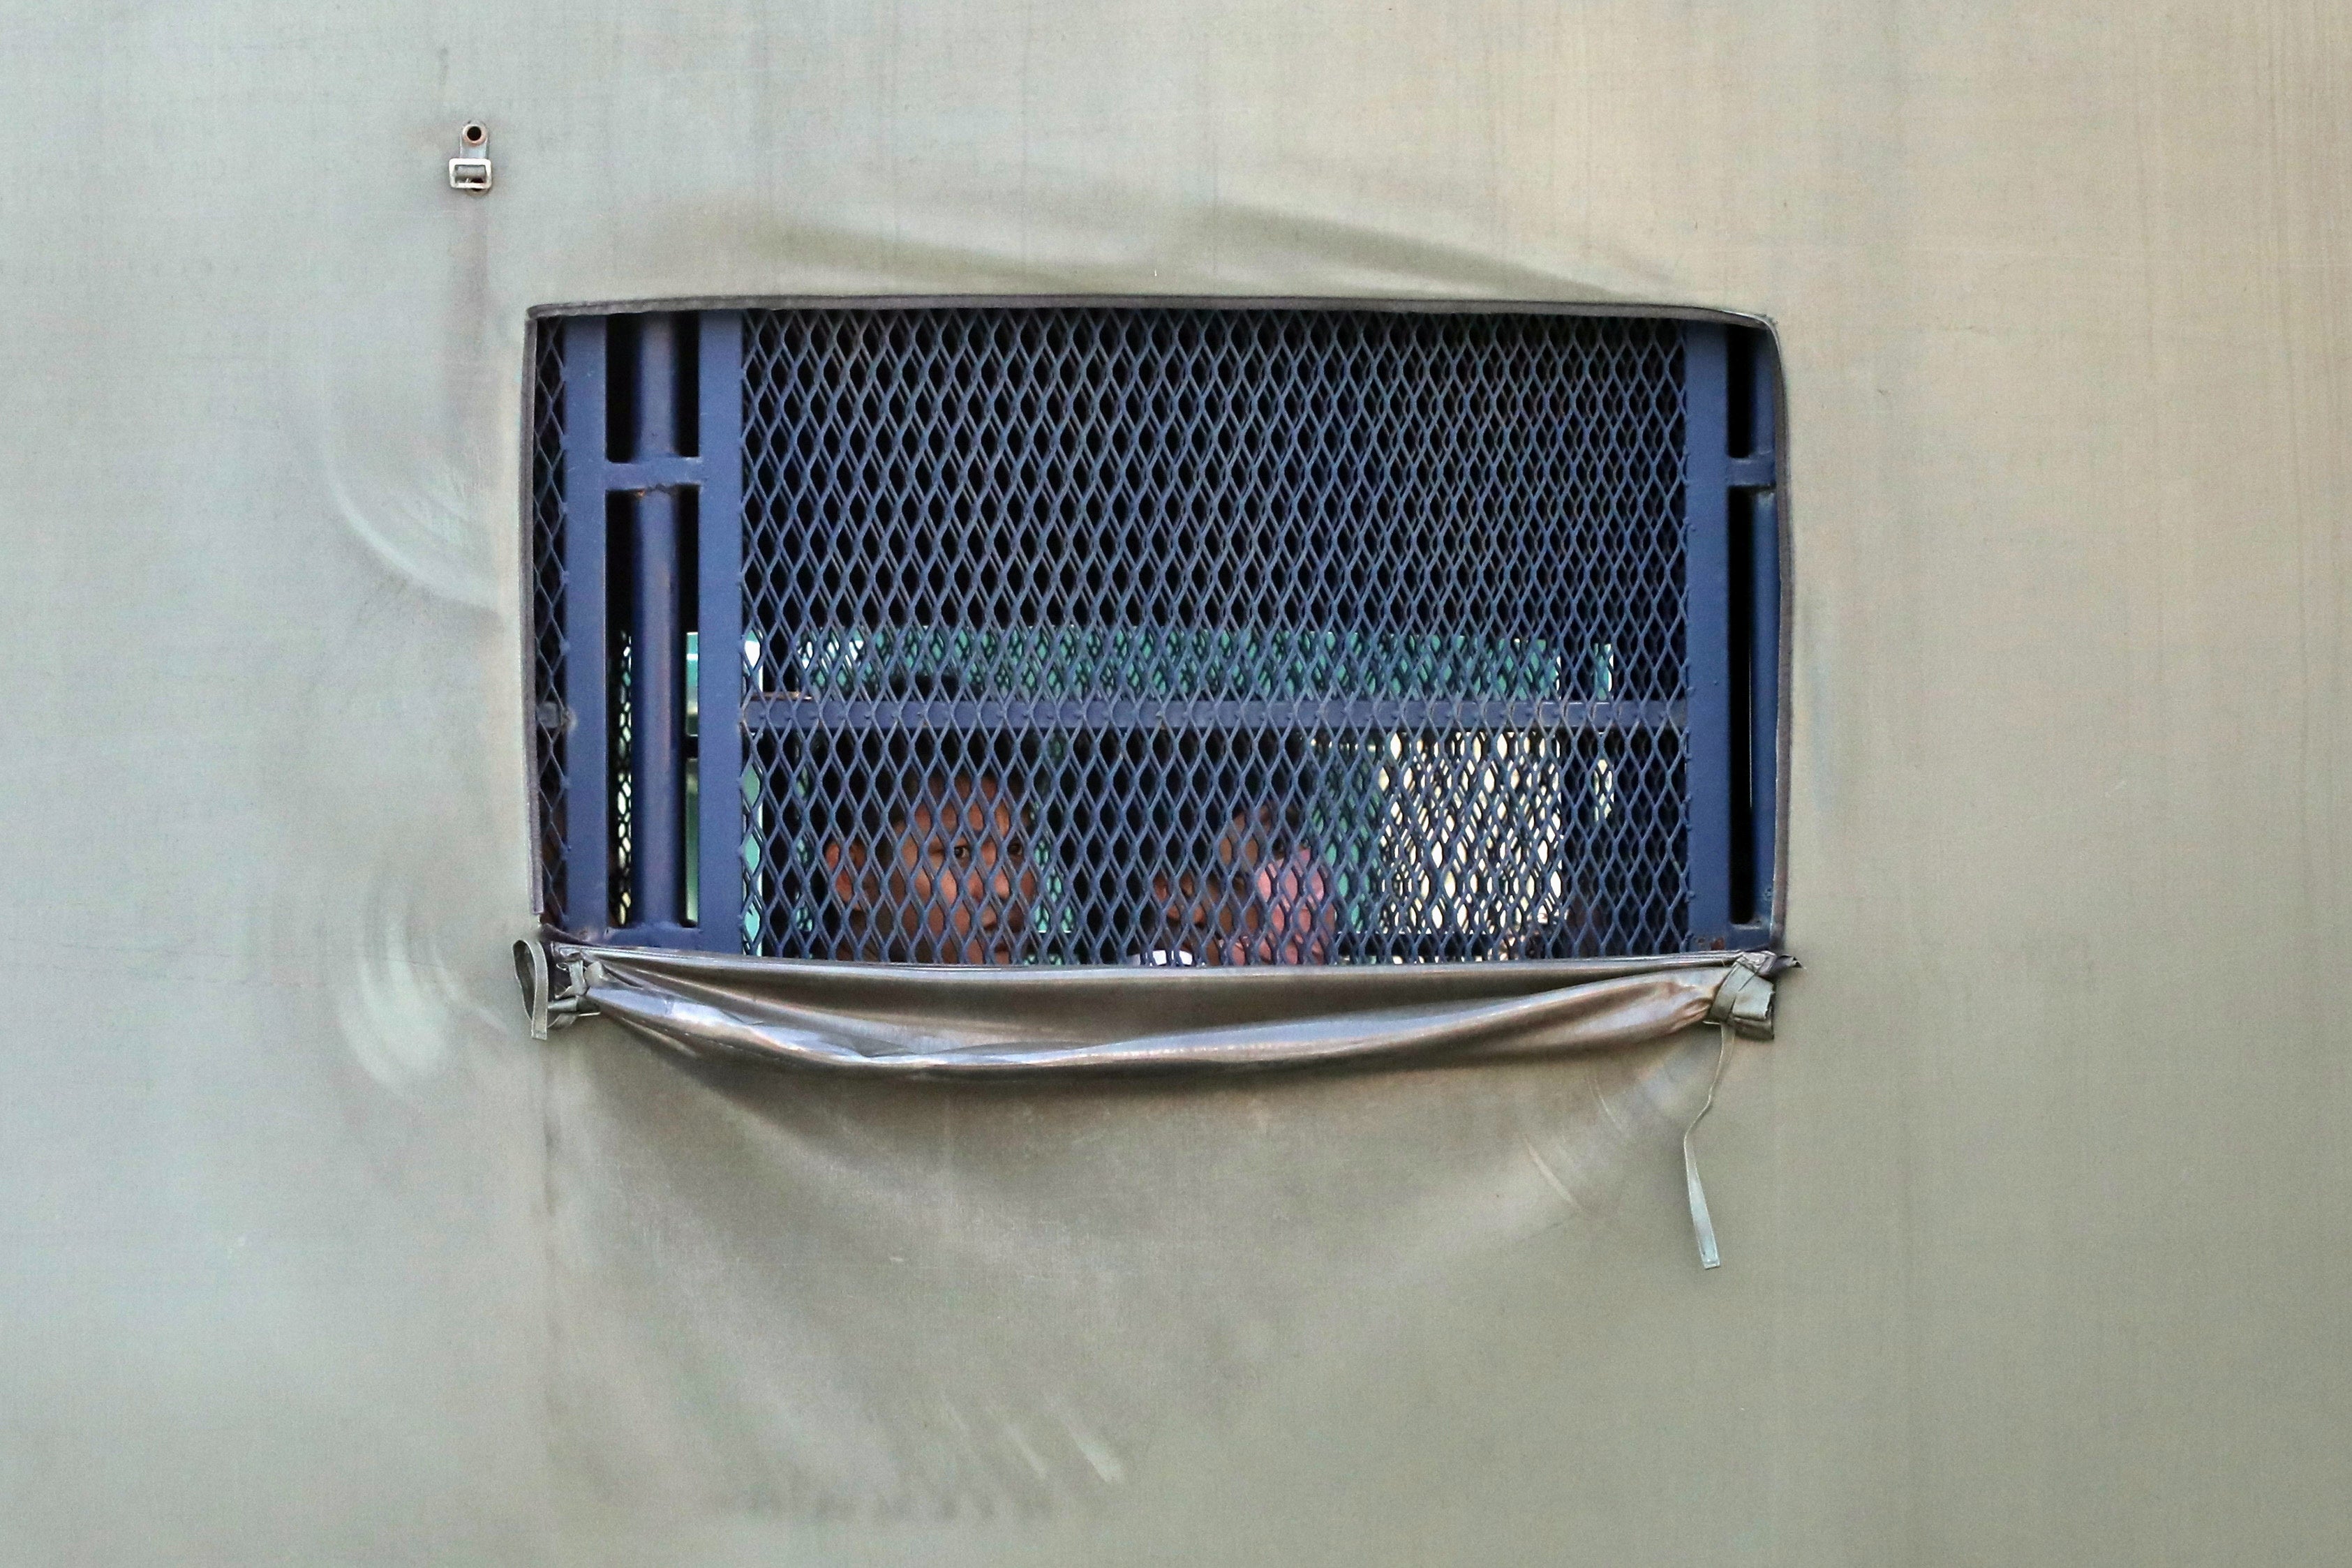 Myanmar migrants to be deported from Malaysia are seen inside an immigration truck, in Lumut, Malaysia on 23 February, 2021